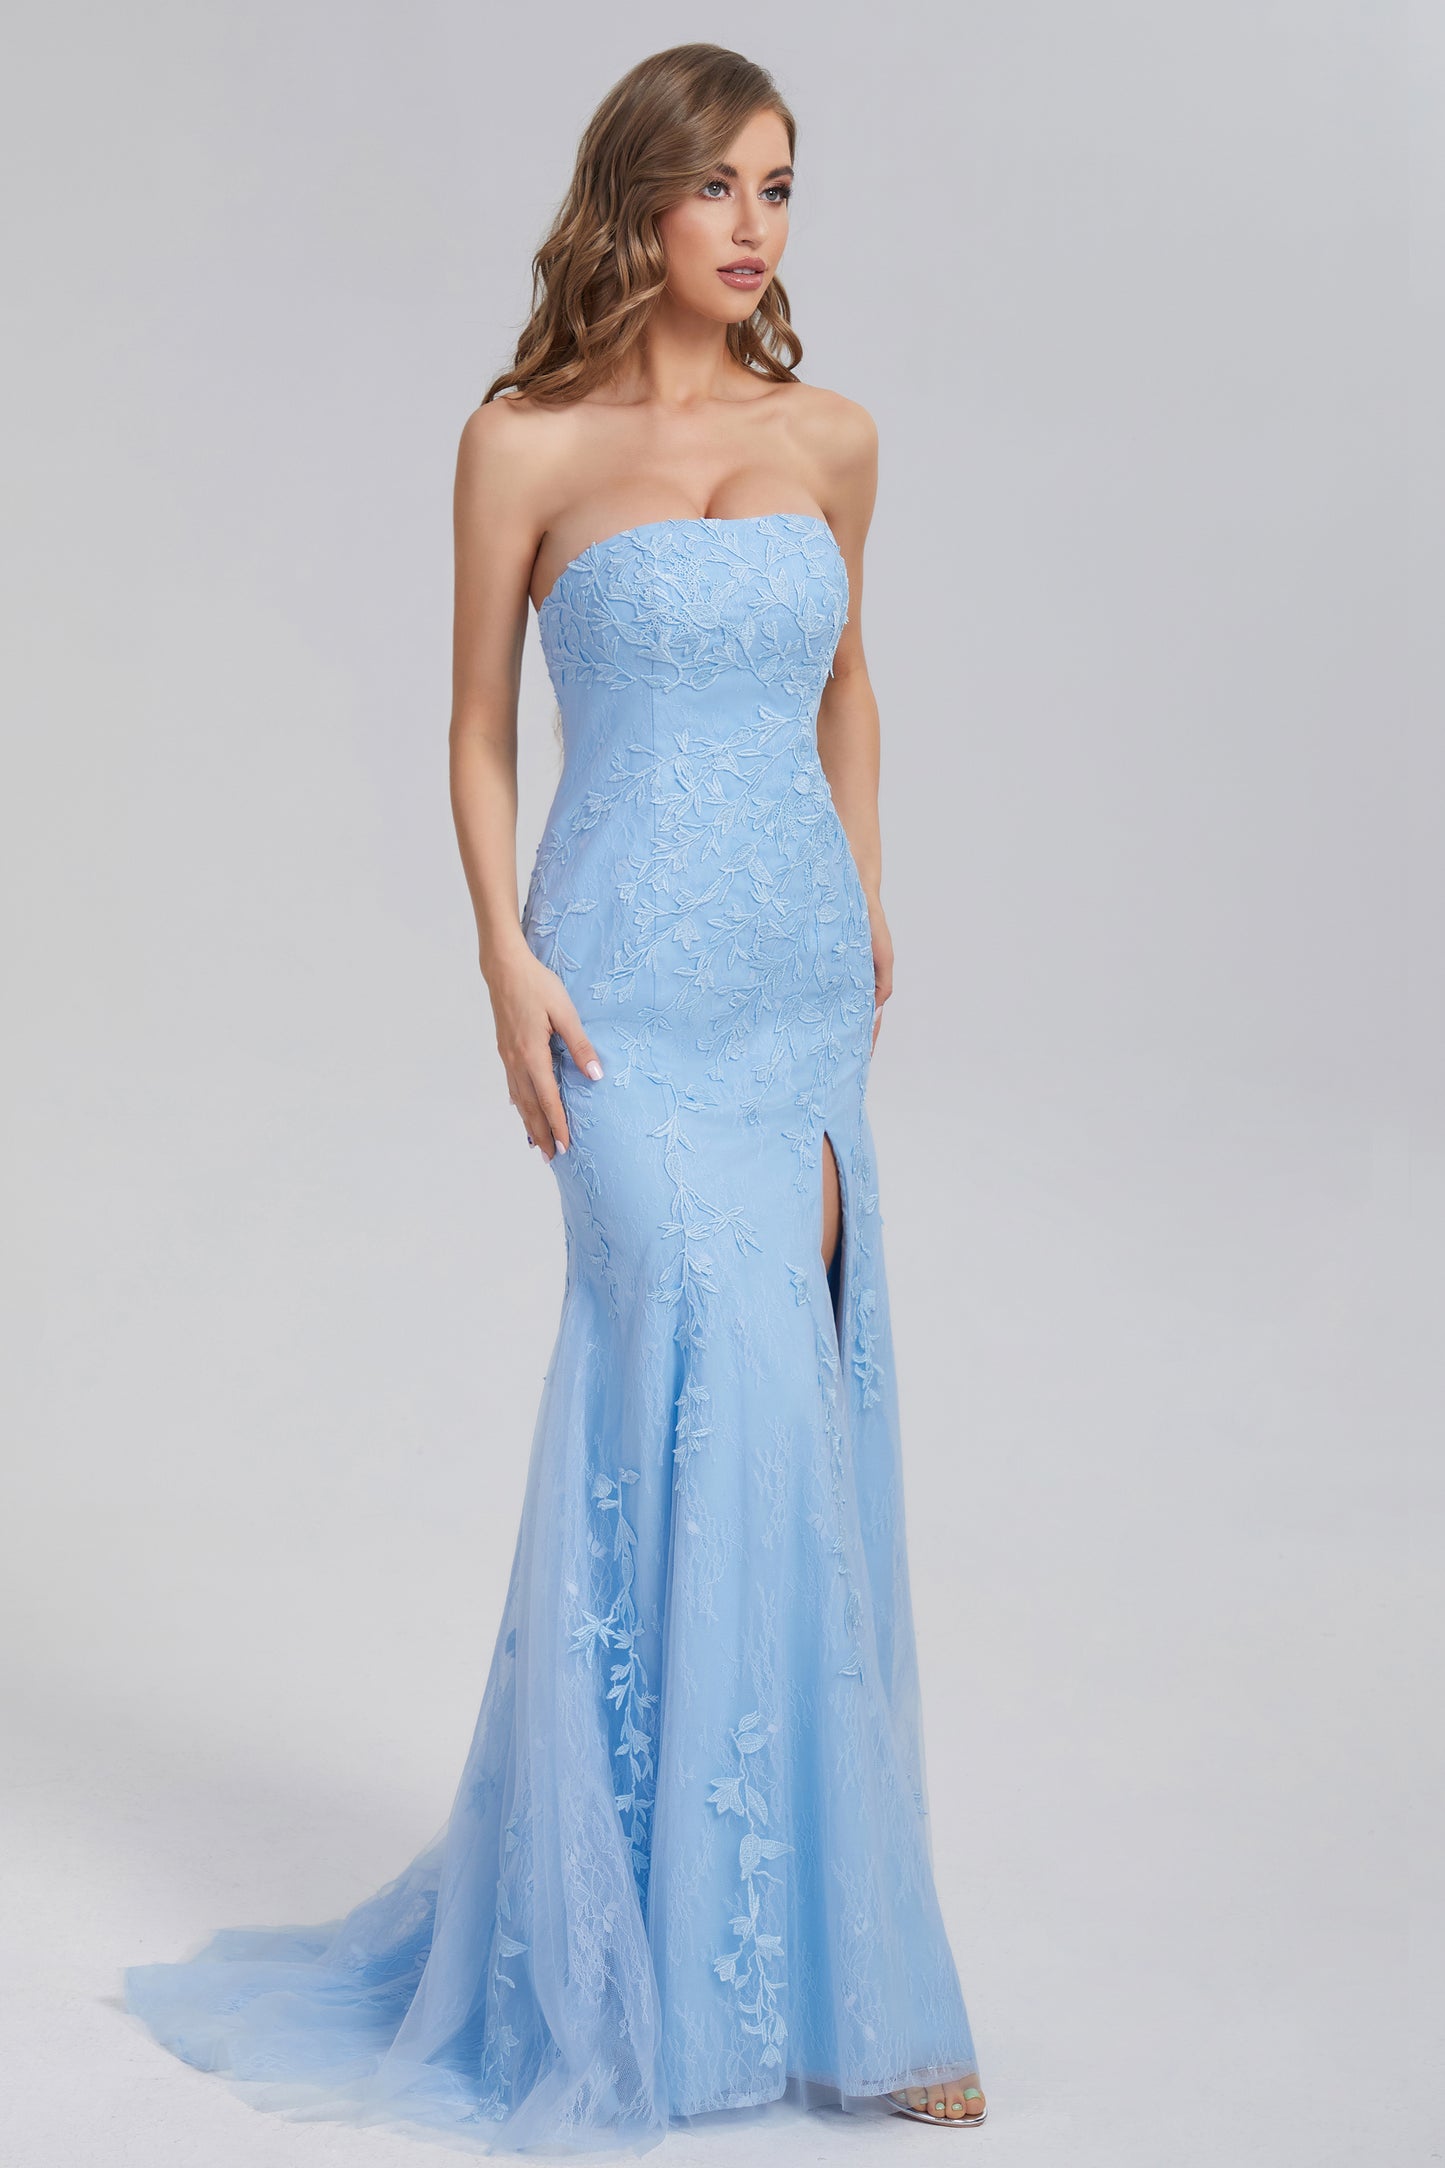 Mermaid Strapless Appliques Lace Prom Dresses